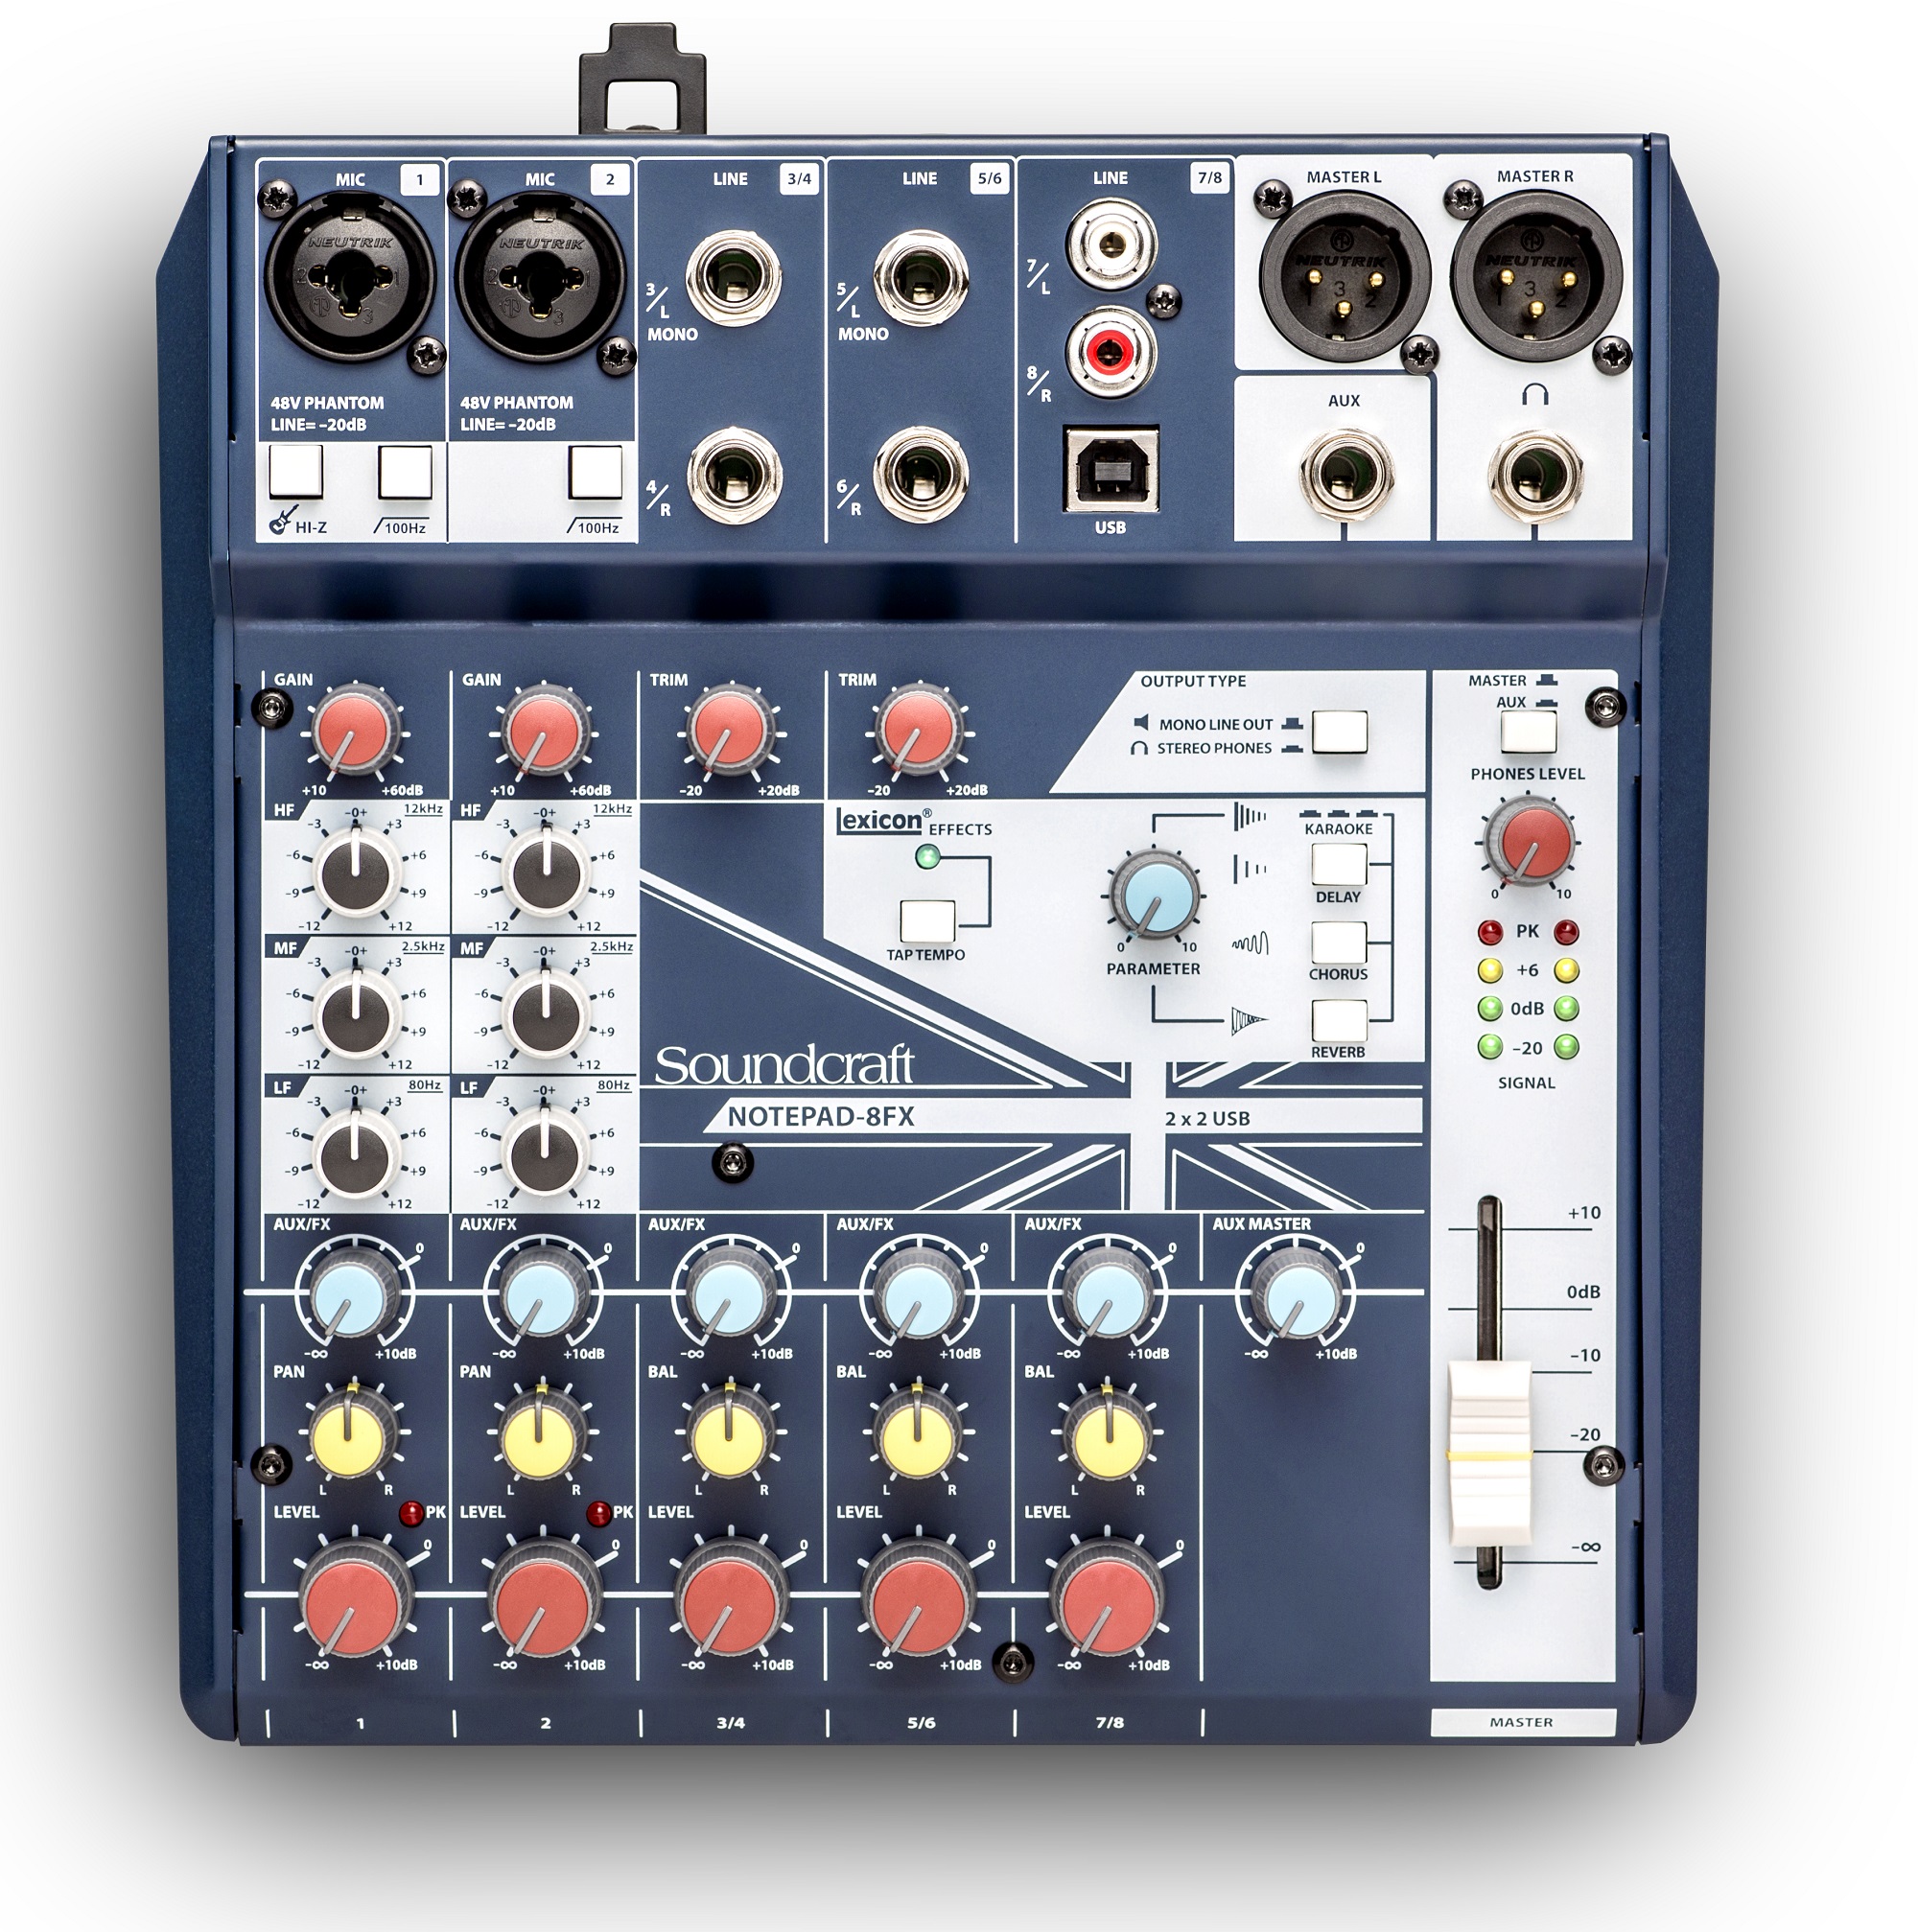 Mixer Soundcraft Notepad-8FX | Anh Duy Audio